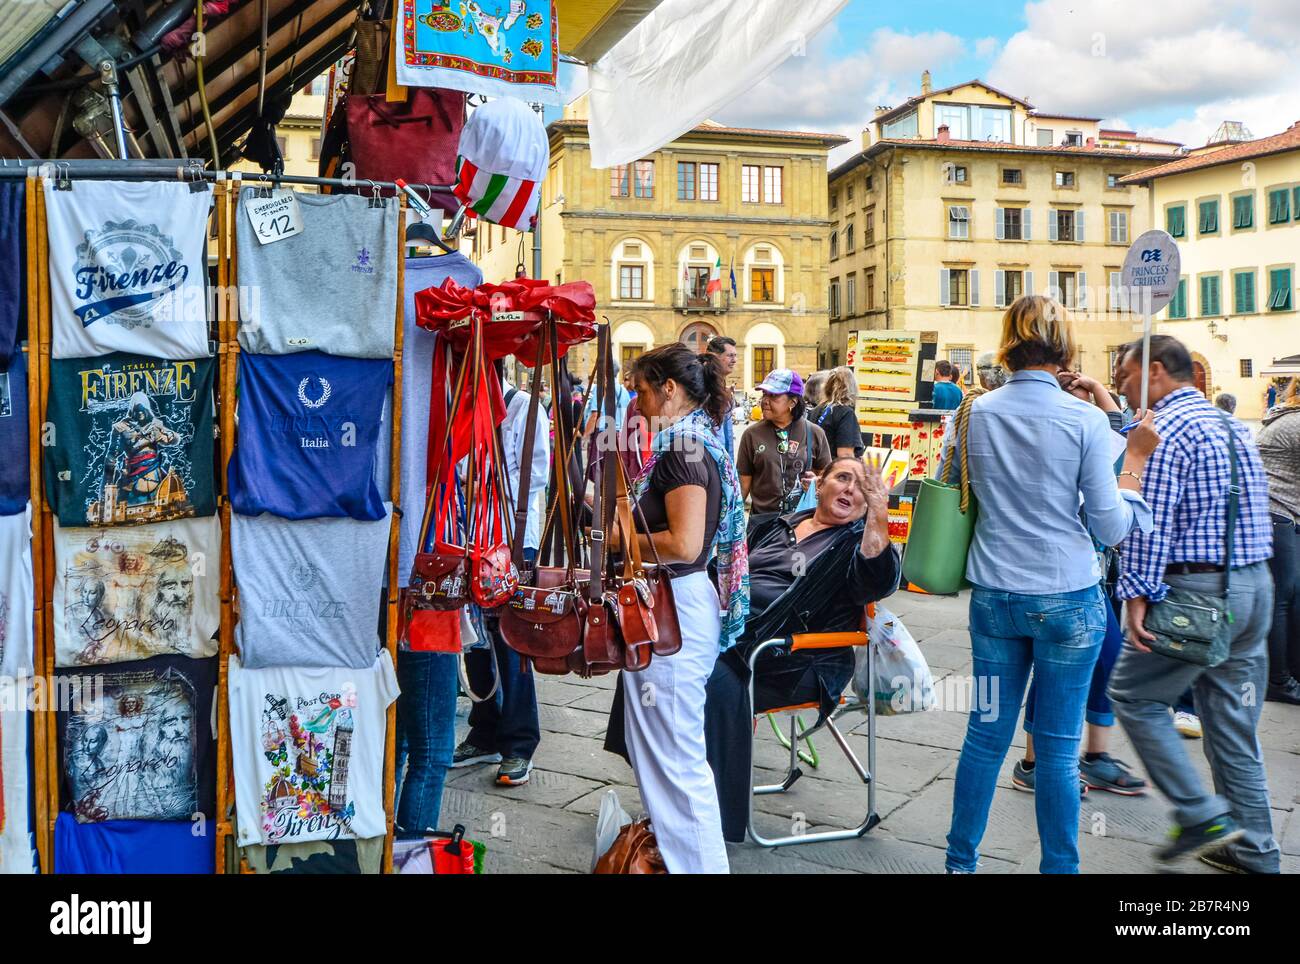 Tourists and tour guides shop for souvenirs and talk with local vendors and merchants at an outdoor market on Piazza Santa Croce in Florence, Italy. Stock Photo